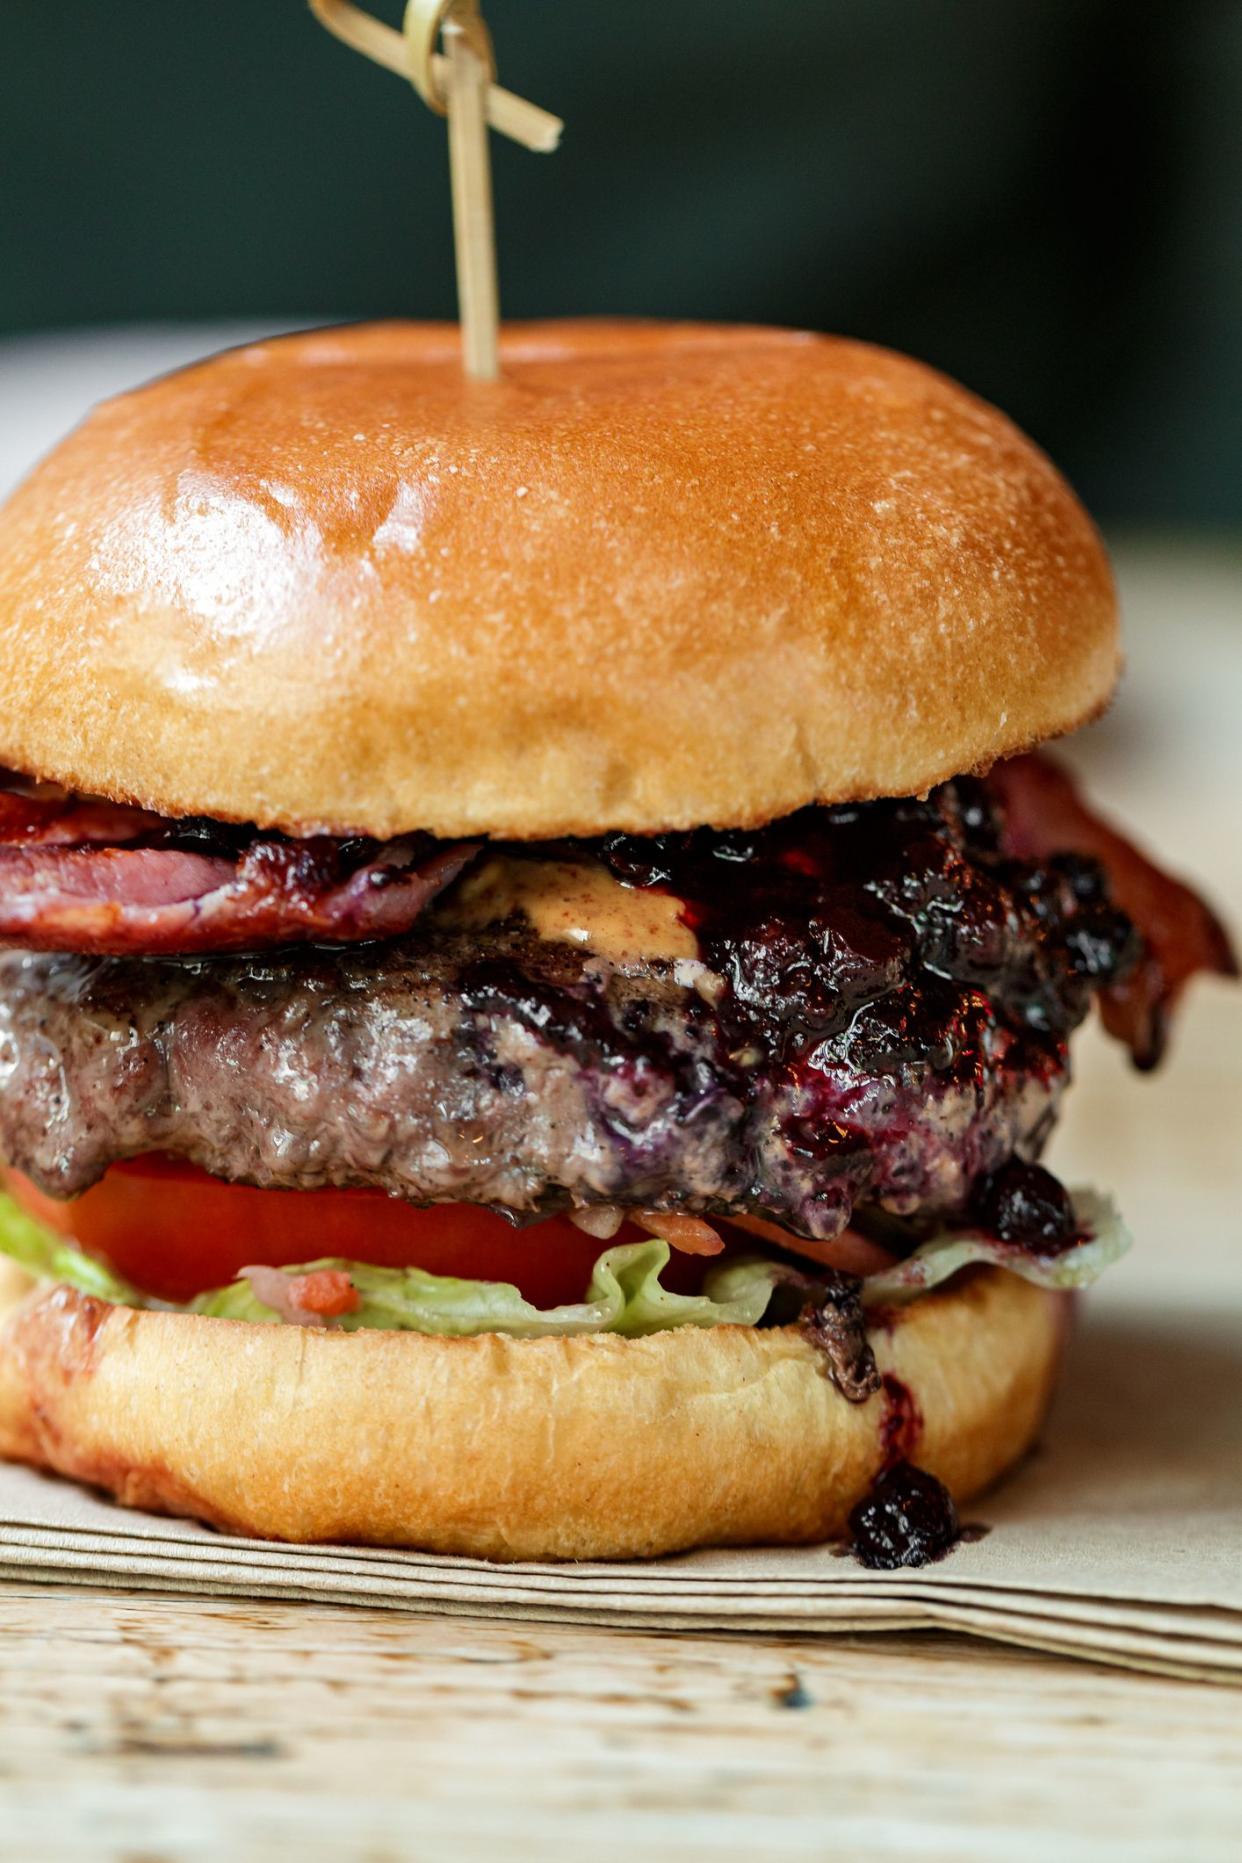 Close up image depicting a freshly cooked bacon cheeseburger in a restaurant. The burger is sandwiched between two glazed buns and is loaded with a flame grilled beef patty, melted cheese, blueberry jam and crispy bacon and salad.